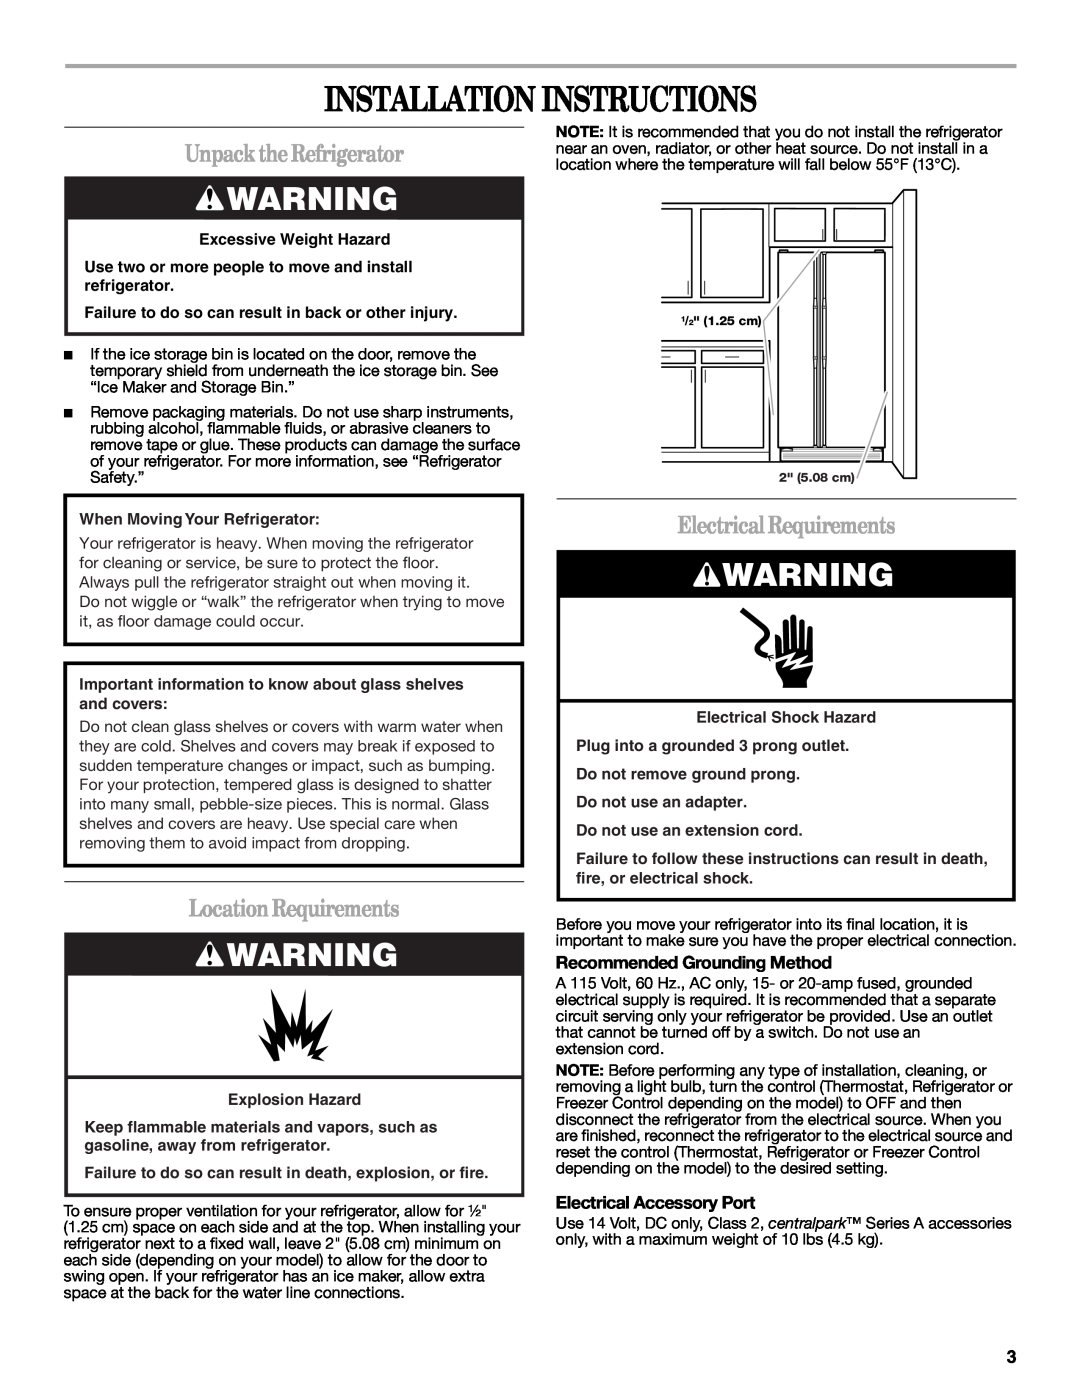 Whirlpool W10134555A Installation Instructions, Unpack the Refrigerator, LocationRequirements, Electrical Requirements 